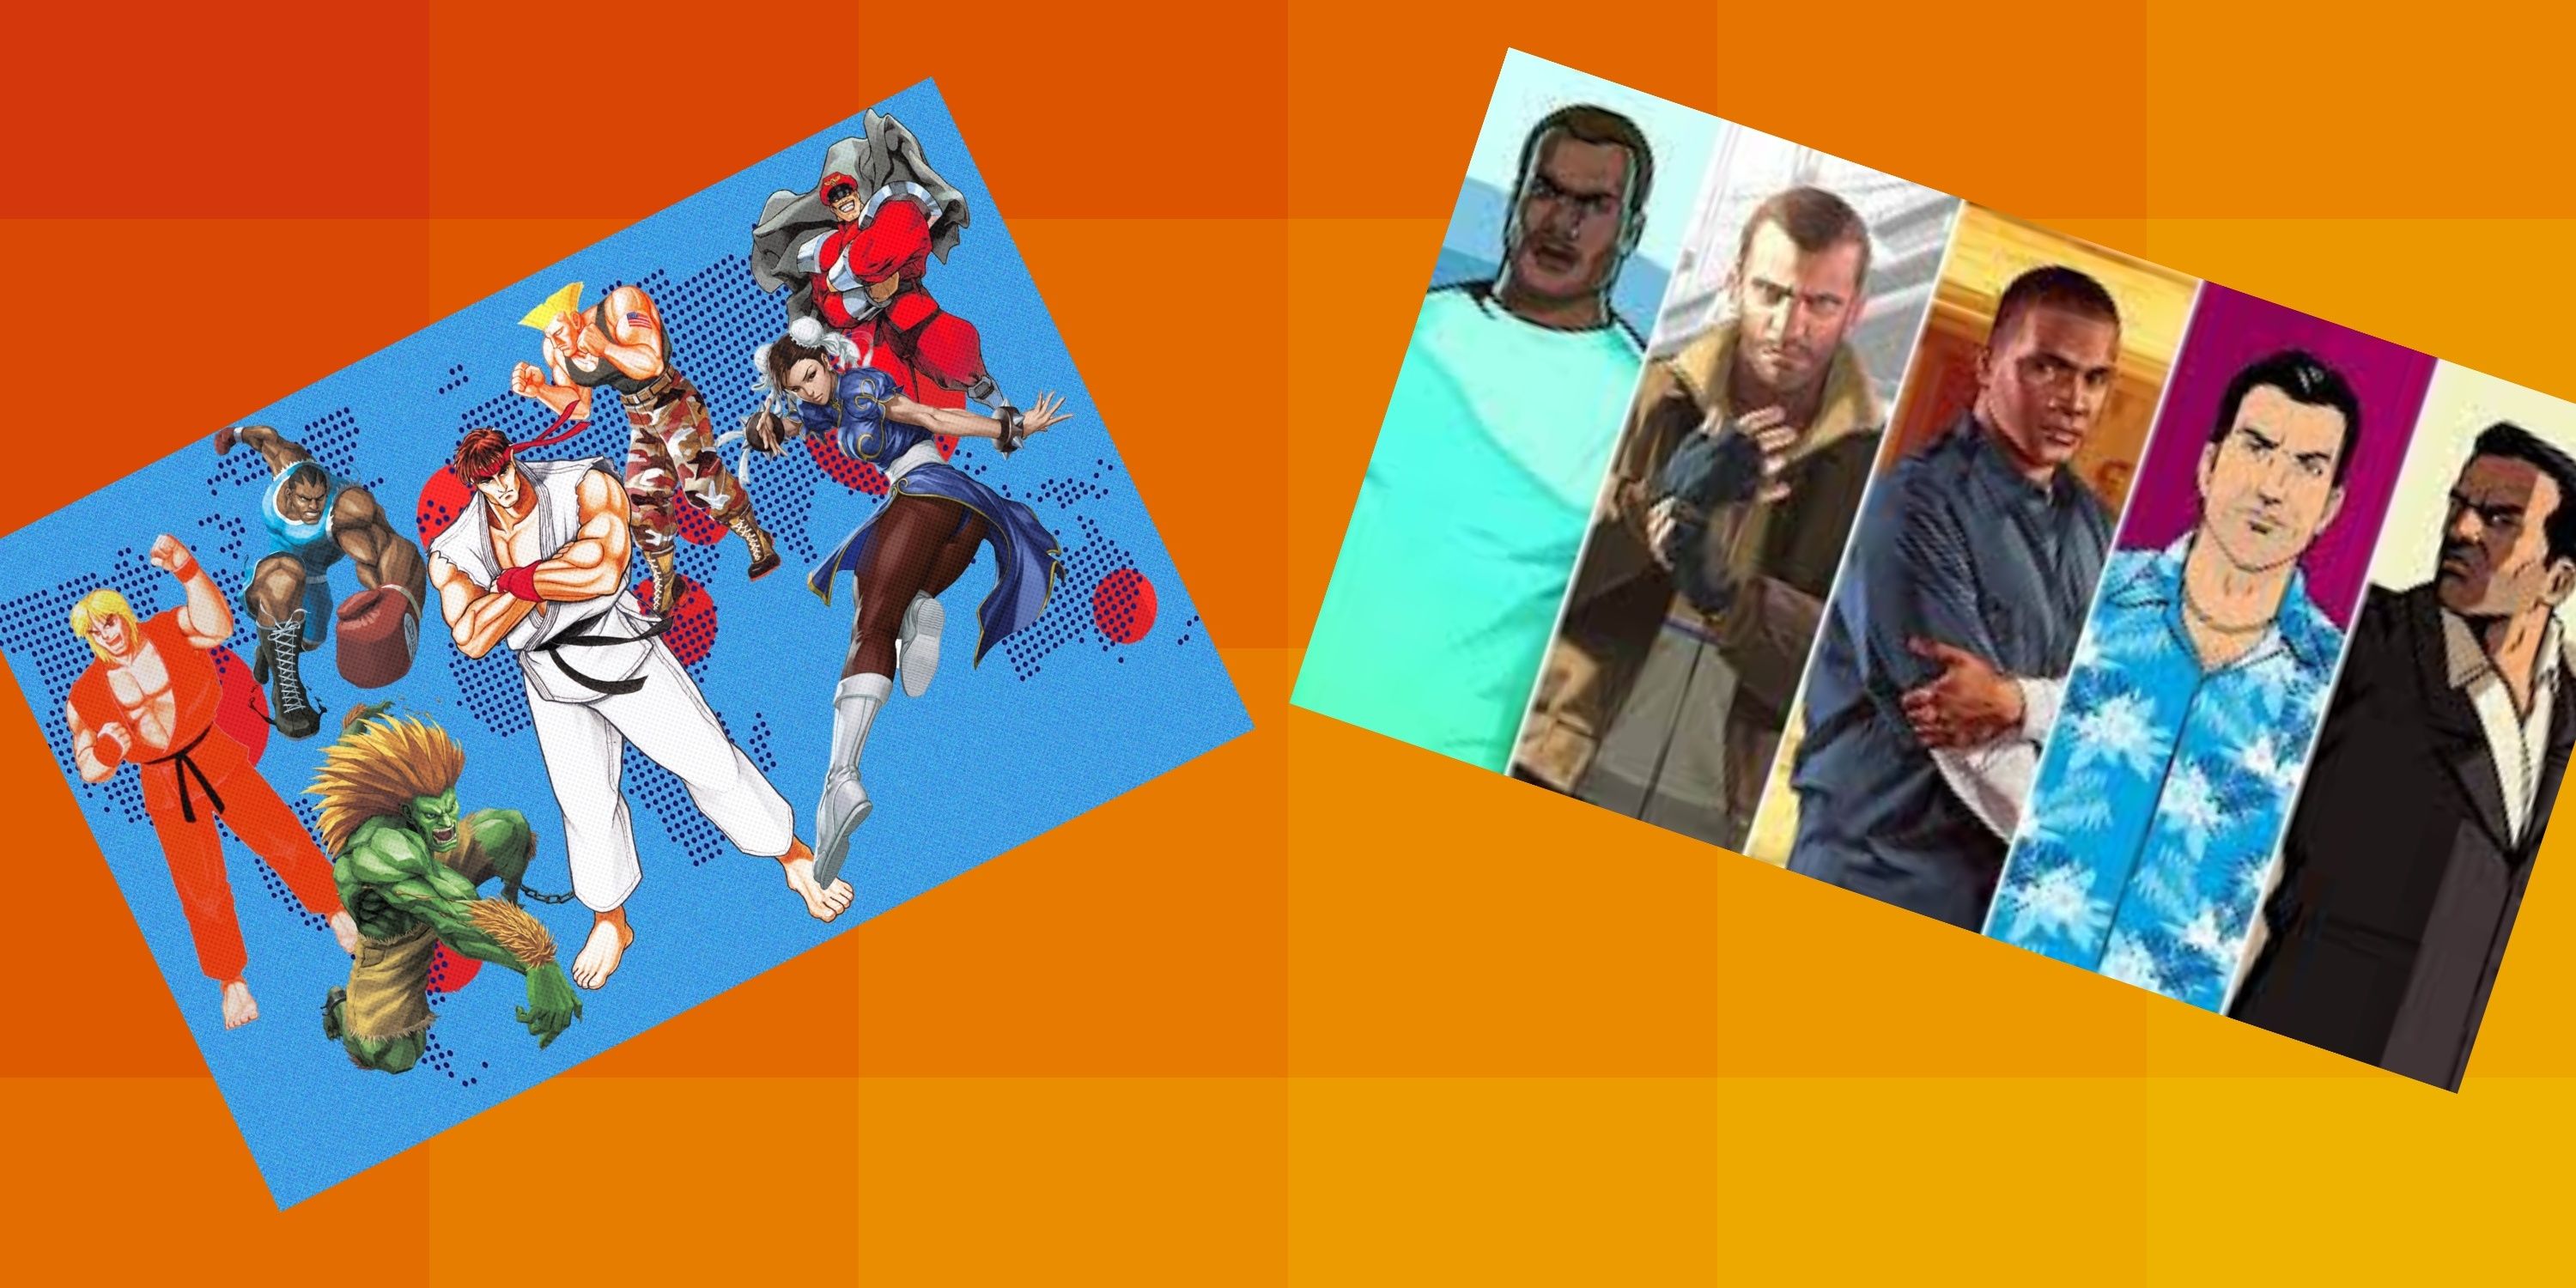 Fighters from Street Fighter and protagonist from GTA stare out 